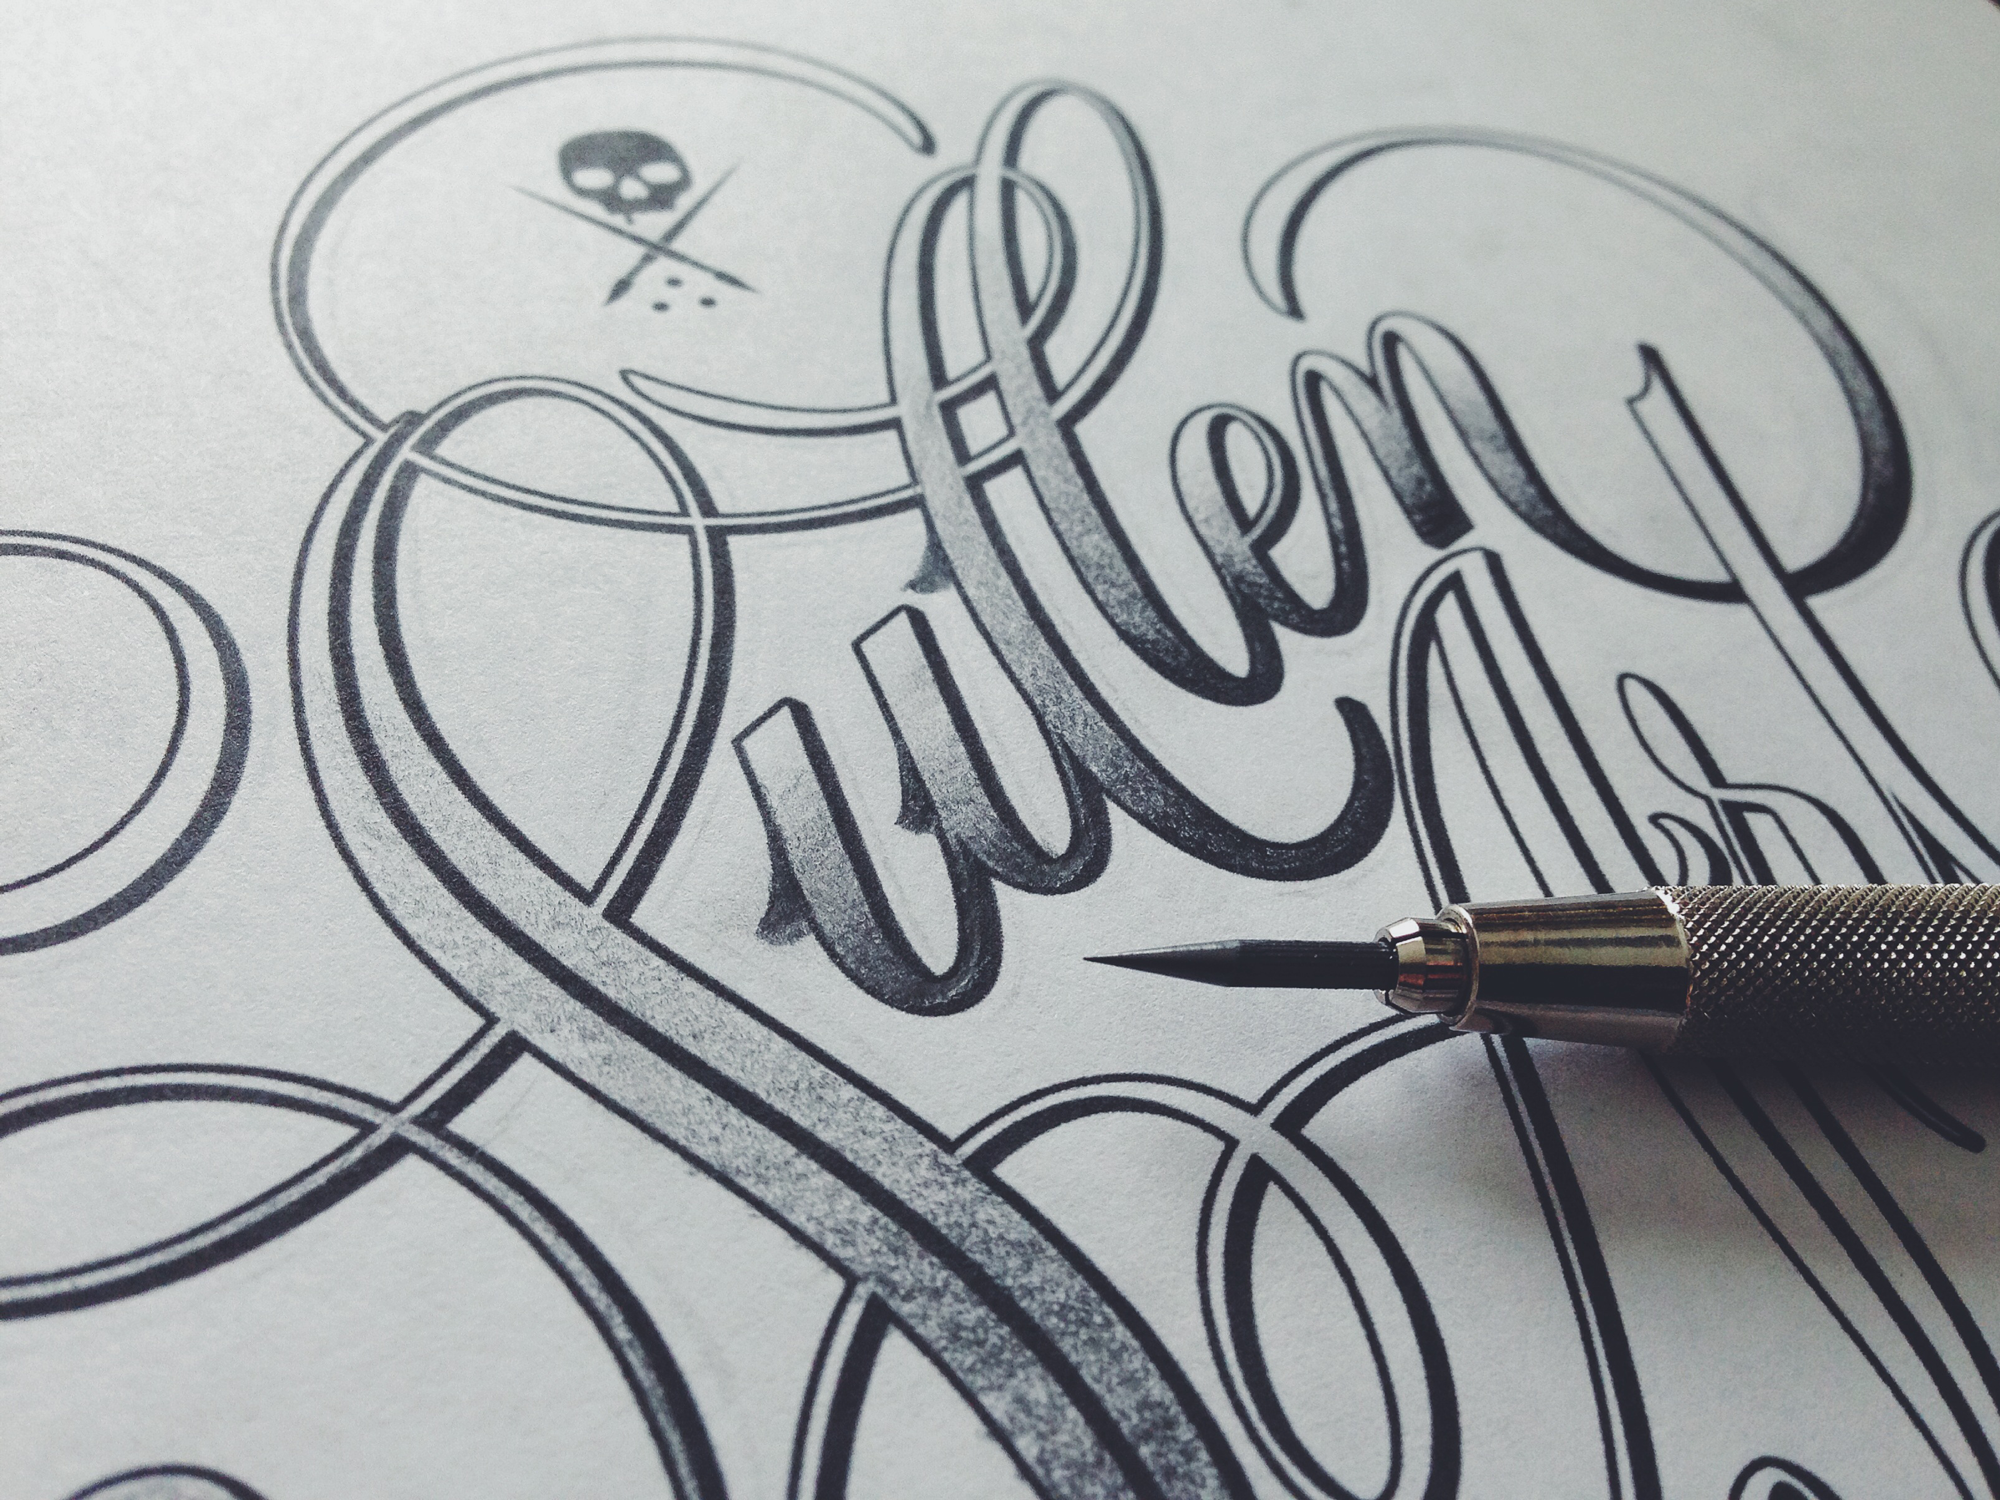 Gangster Hustler Is The Same $hit by Catrin Valadez on Dribbble